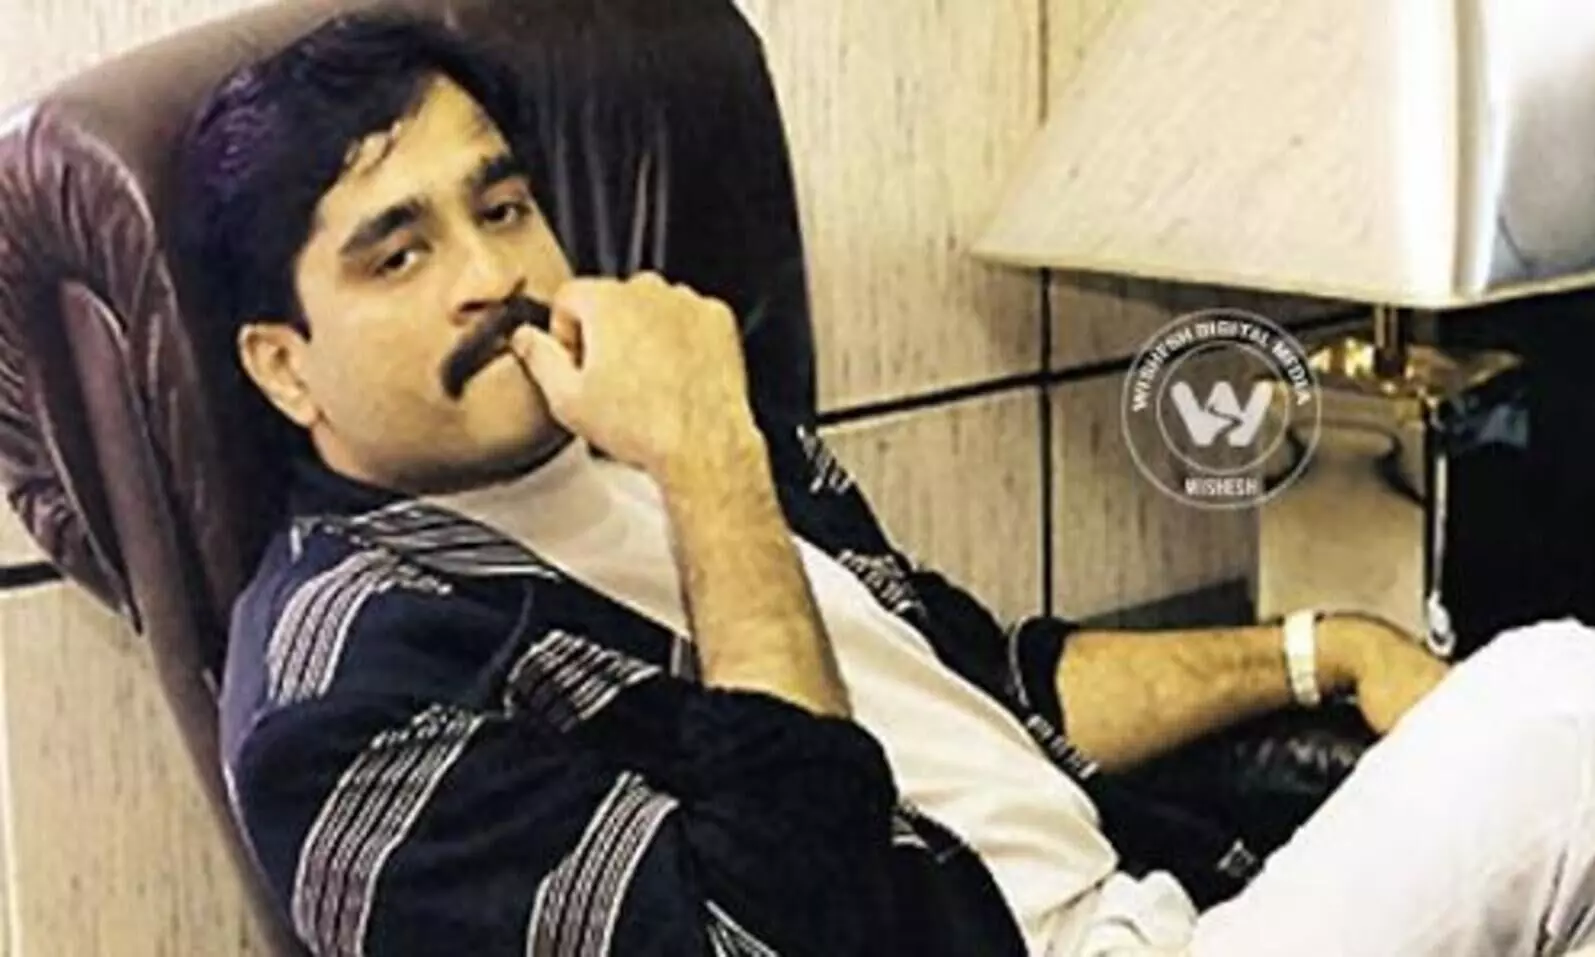 Dawood Ibrahim acquired citizenship of a Caribbean country, bought new properties in Karachi: Reveals a dossier of Indian Intel agencies